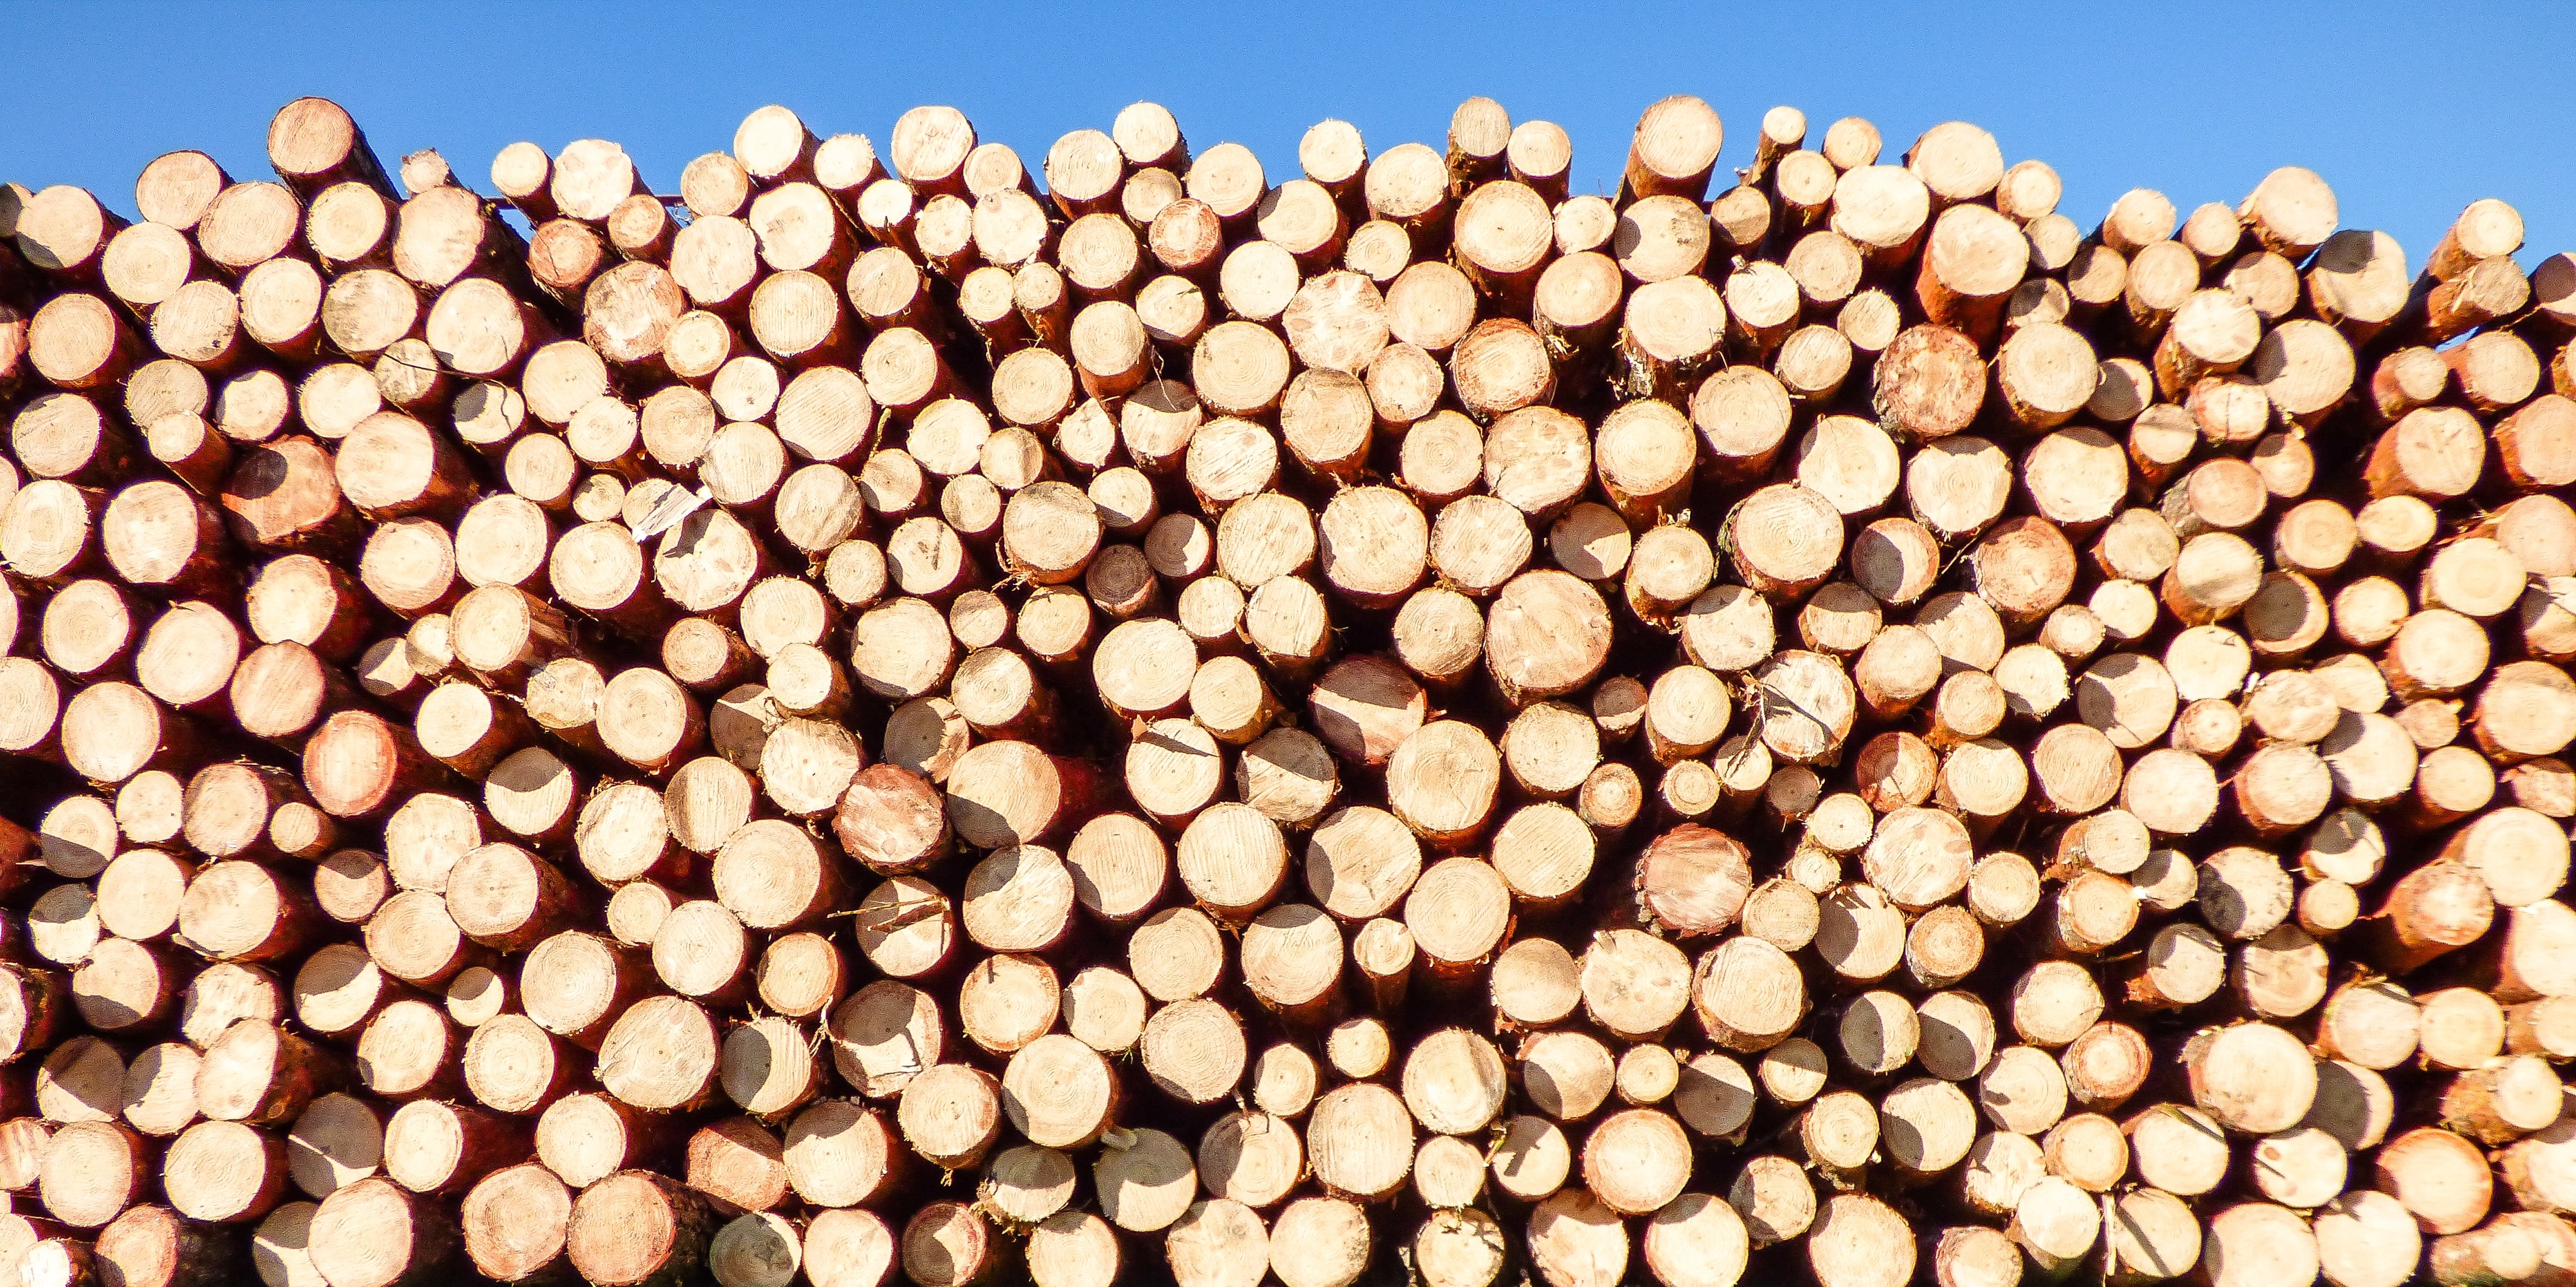 Are You Prepared for a Wood Utility Pole Shortage?